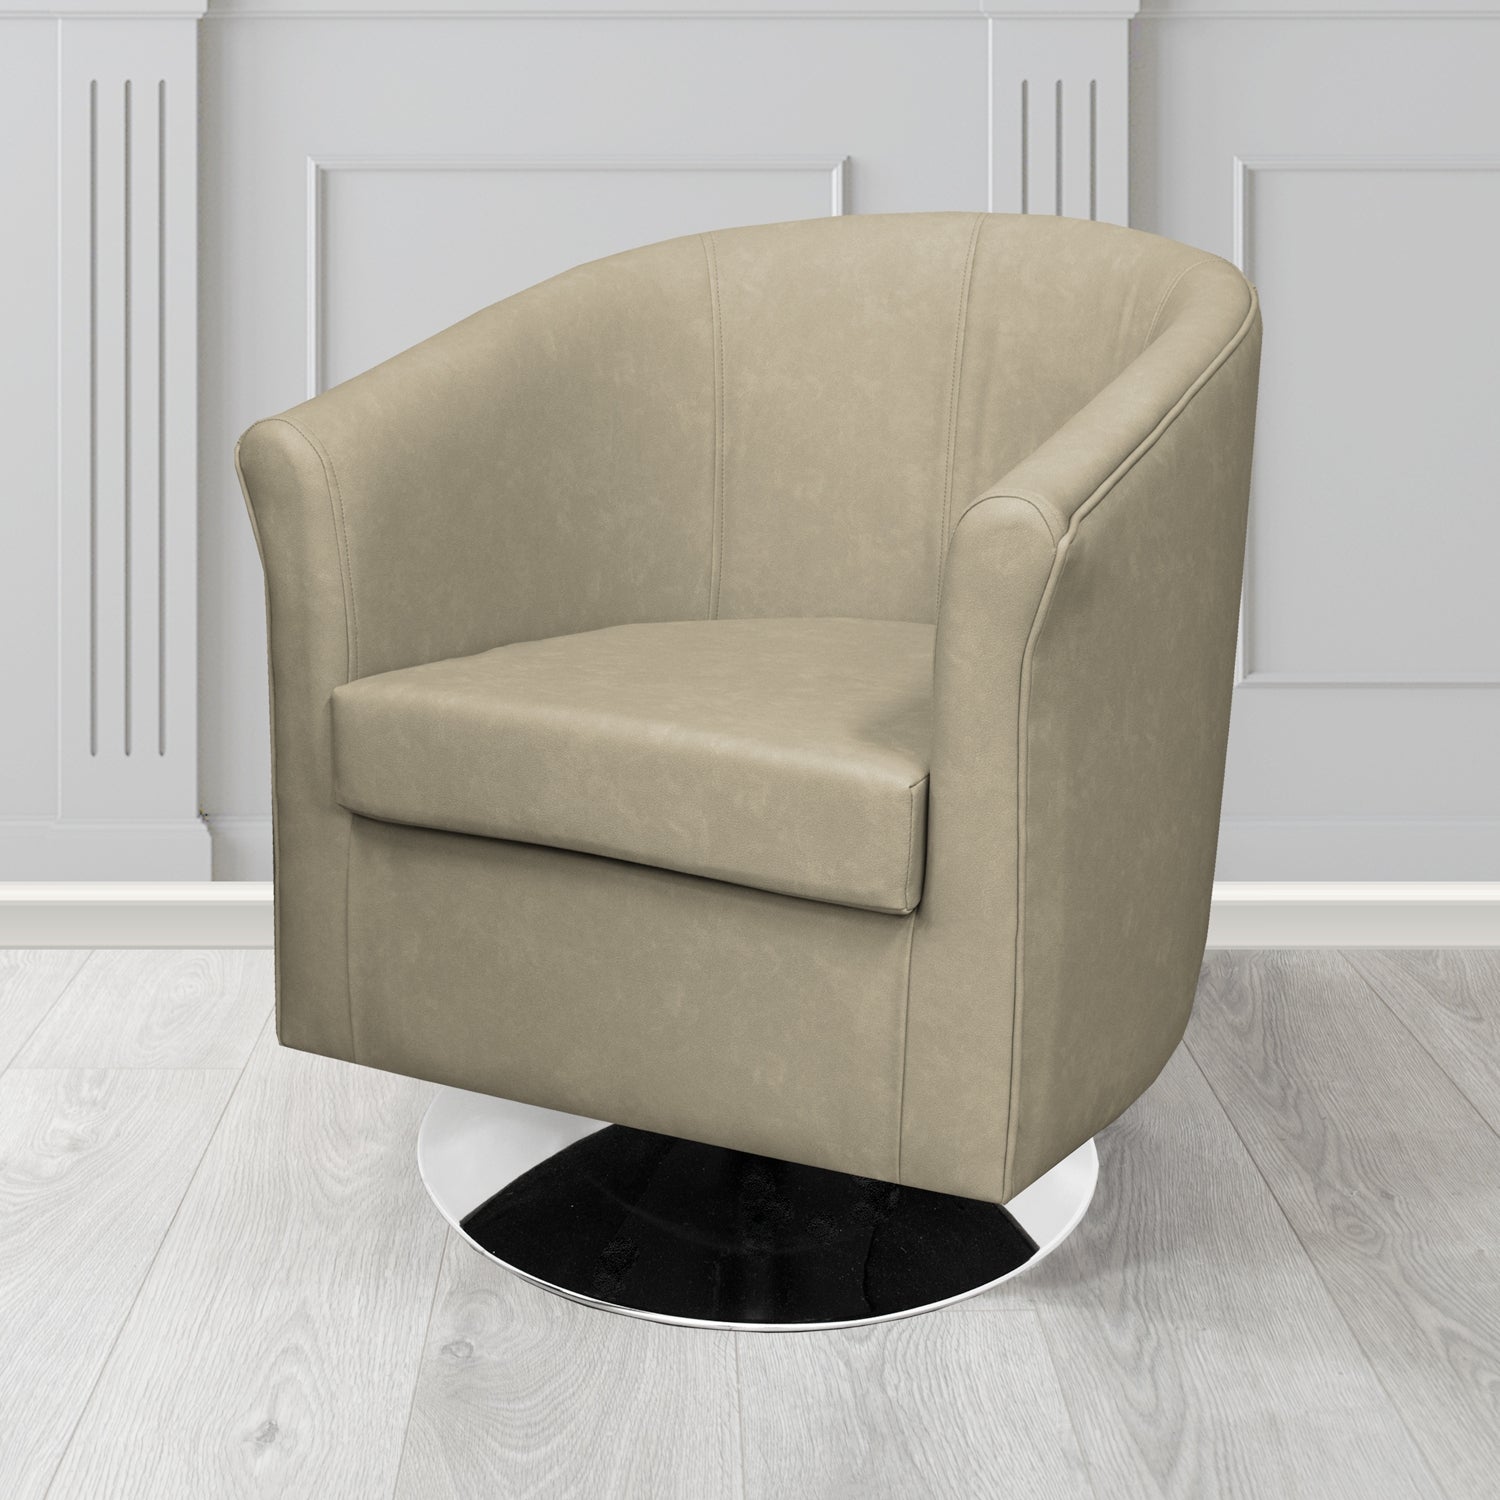 Tuscany Swivel Tub Chair in Infiniti Granite INF1845 Antimicrobial Crib 5 Faux Leather - The Tub Chair Shop